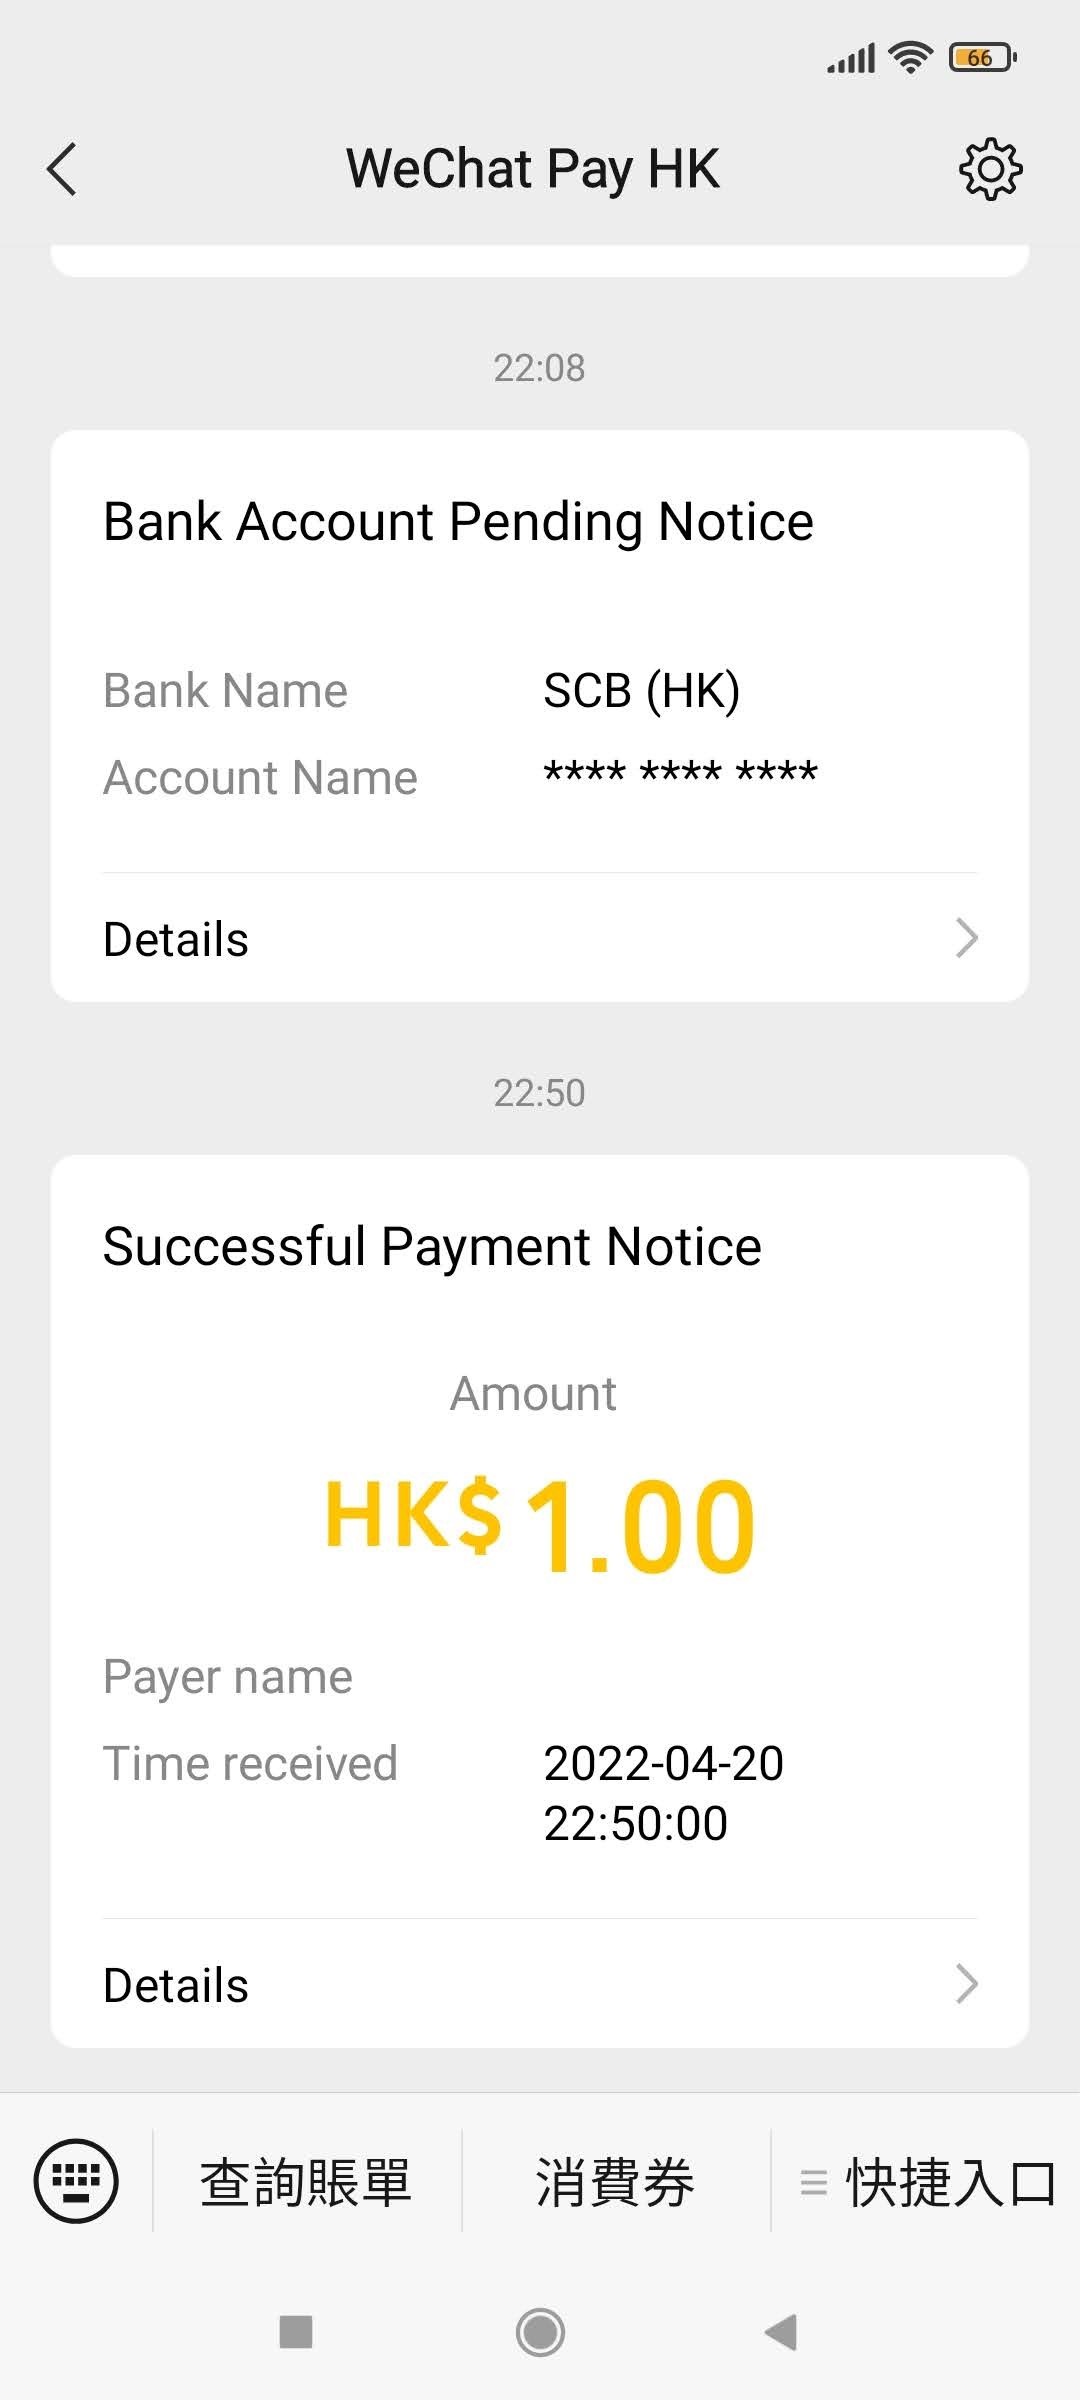 Successful top-up to WeChat Pay HK account